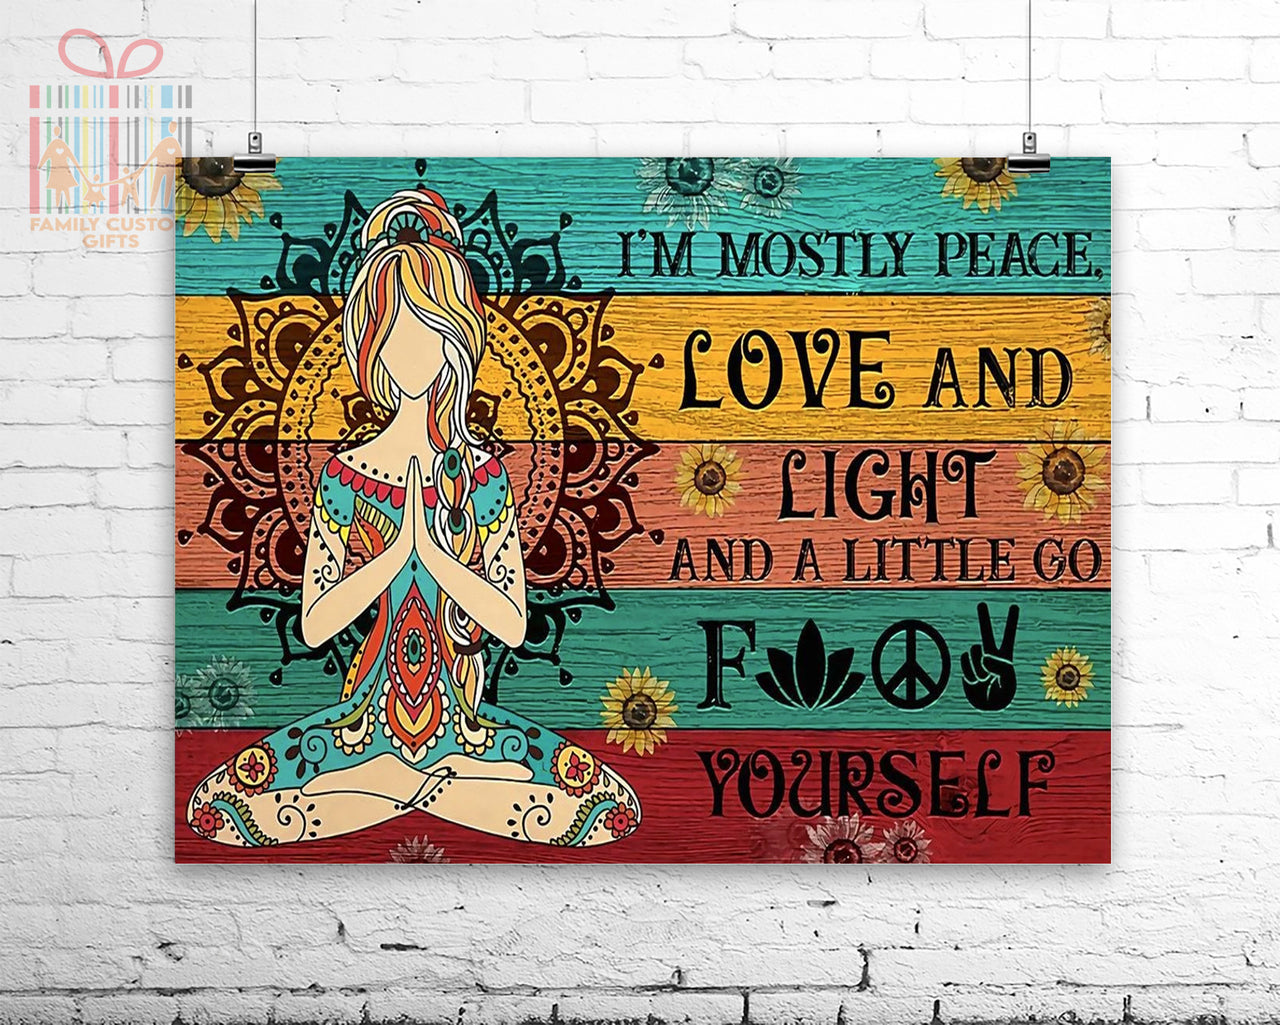 Custom Poster Prints Wall Art I'm Mostly Peace Love and Light A Little Go Personalized Gifts Wall Decor - Gift for Girl